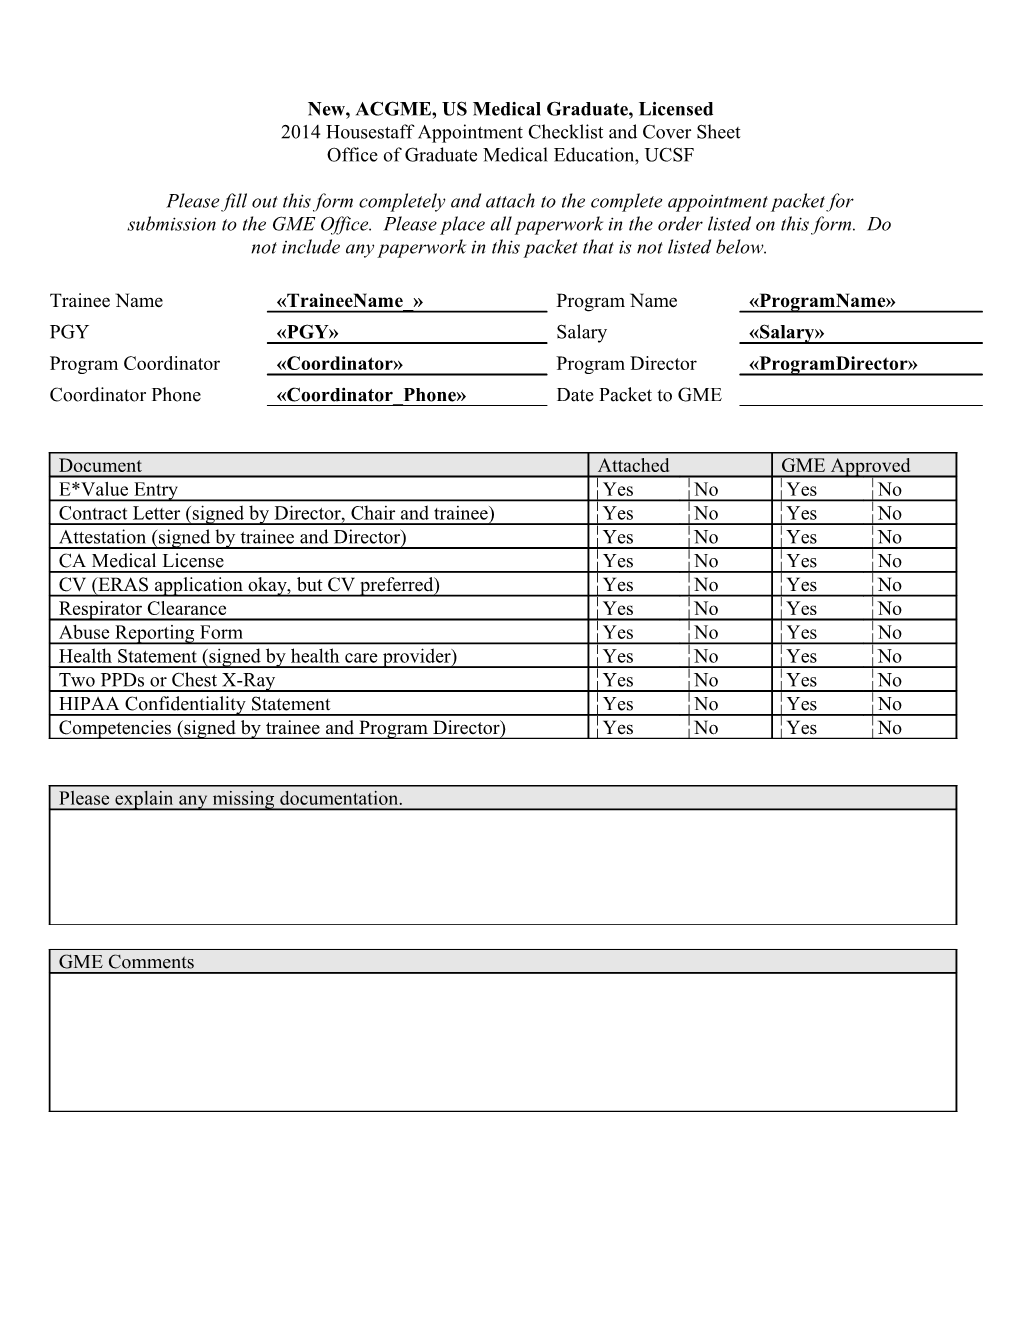 2007 UCSF Housestaff Appointment Checklist and Cover Sheet